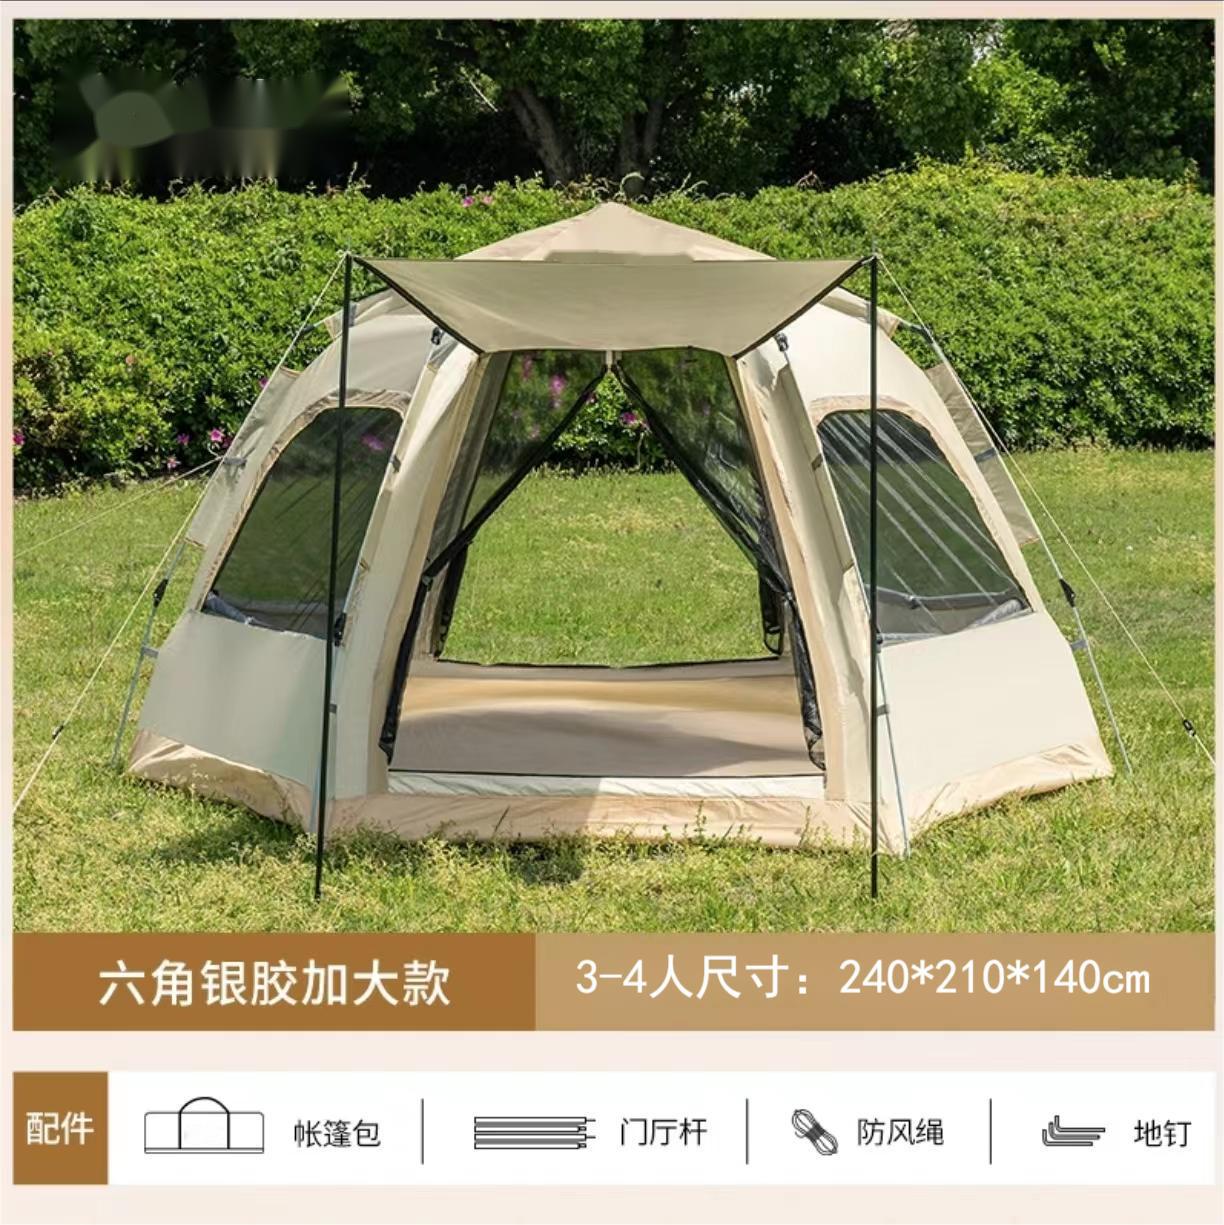 Hexagonal Tent Outdoor Portable Foldable Outdoor Children Camping Equipment Picnic Camping Automatic Thickening